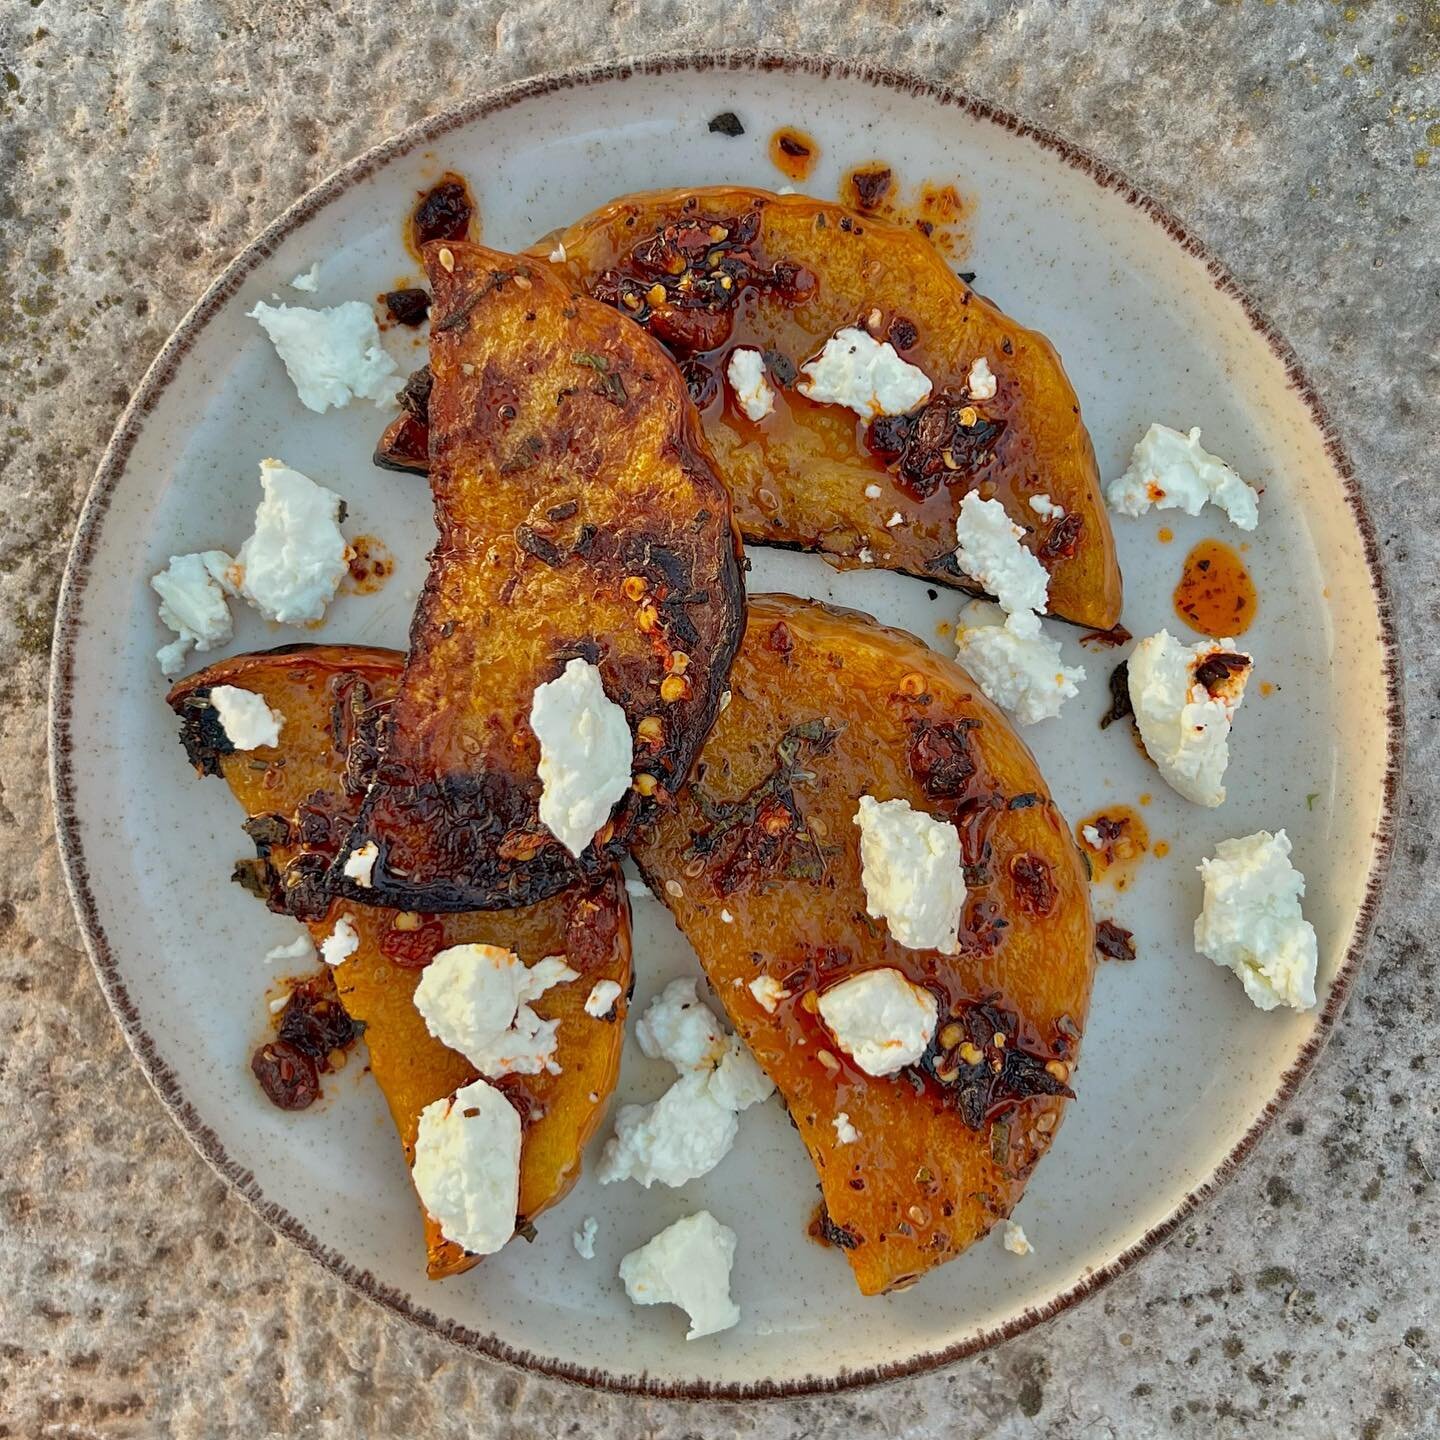 Slowly easing into autumn with some new plates on our menu! Butternut squash with za&rsquo;atar, sage &amp;chilli oil topped with our fresh cheese